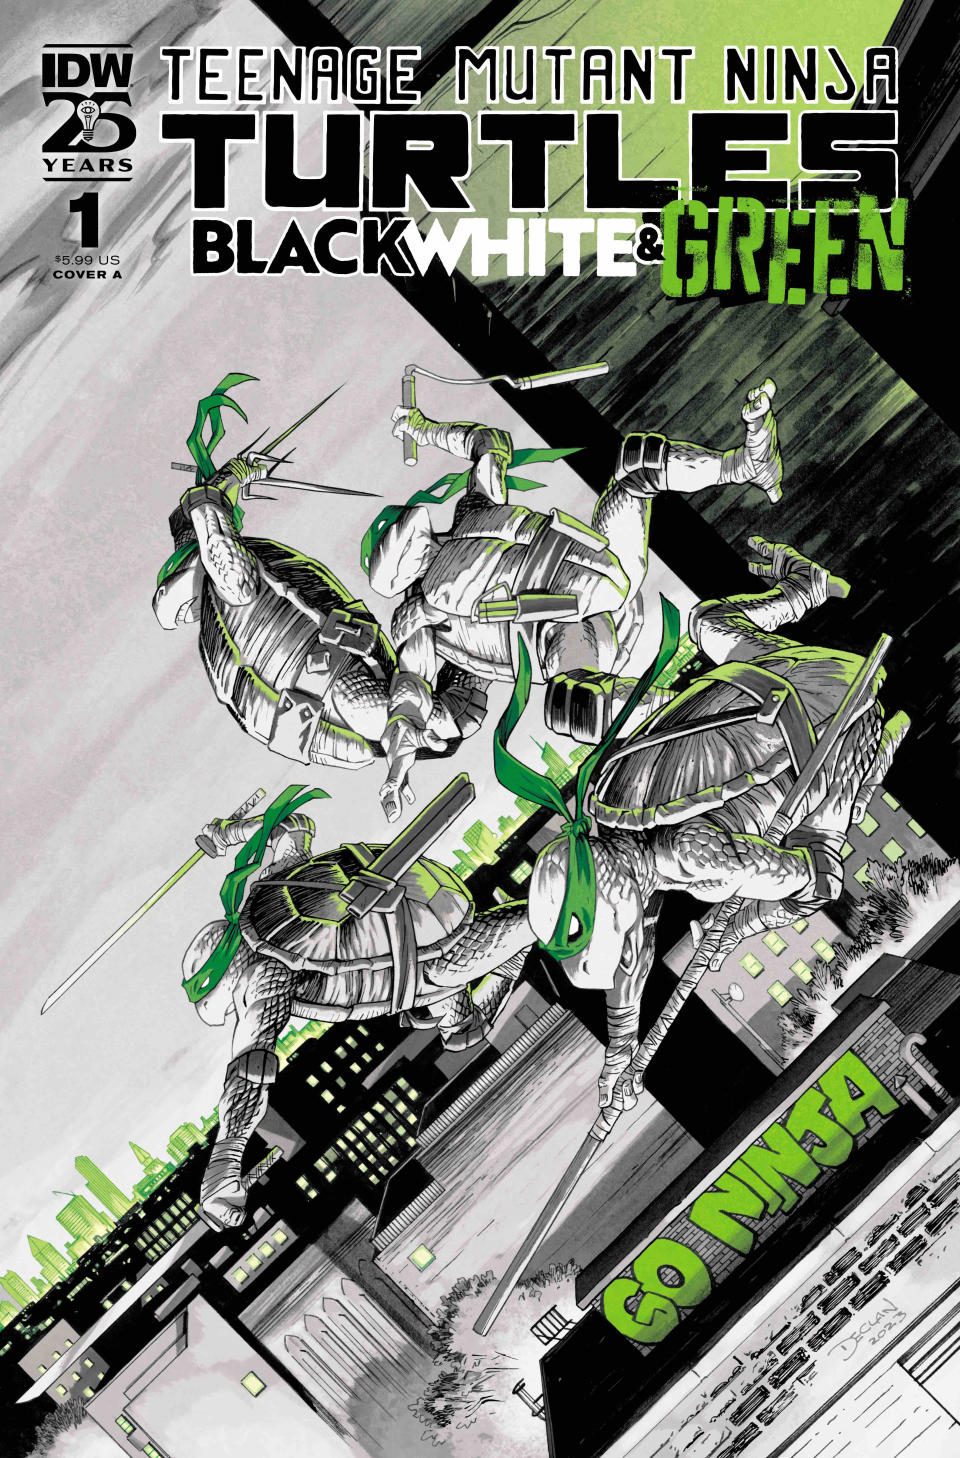 Covers for TMNT: Black, White, and Green